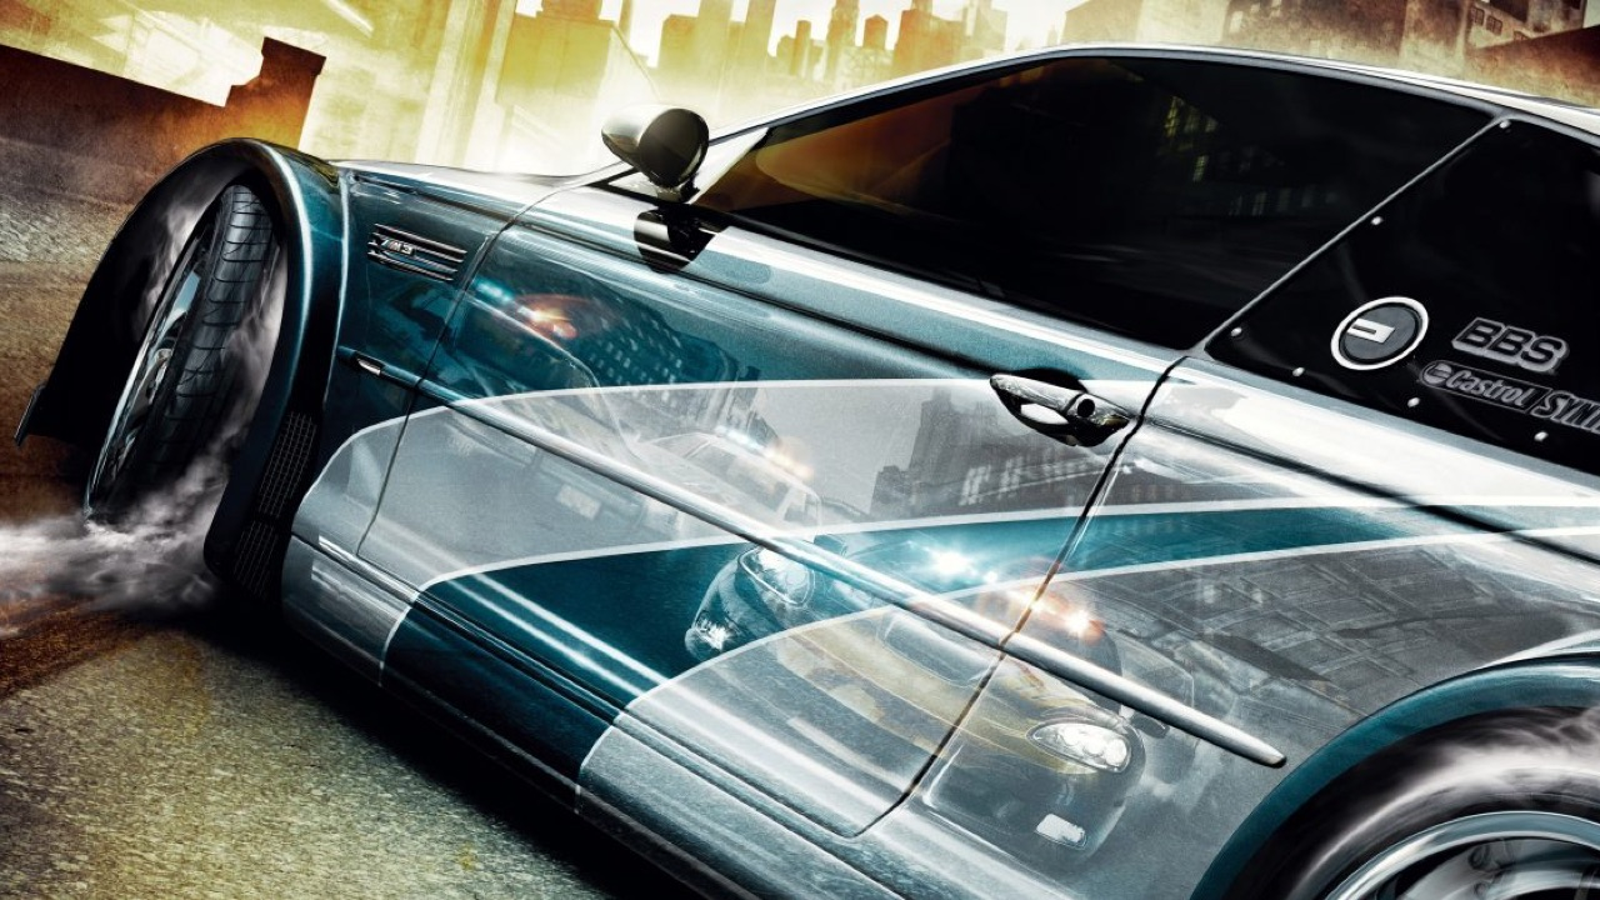 Need for Speed: Most Wanted Free Download for PC